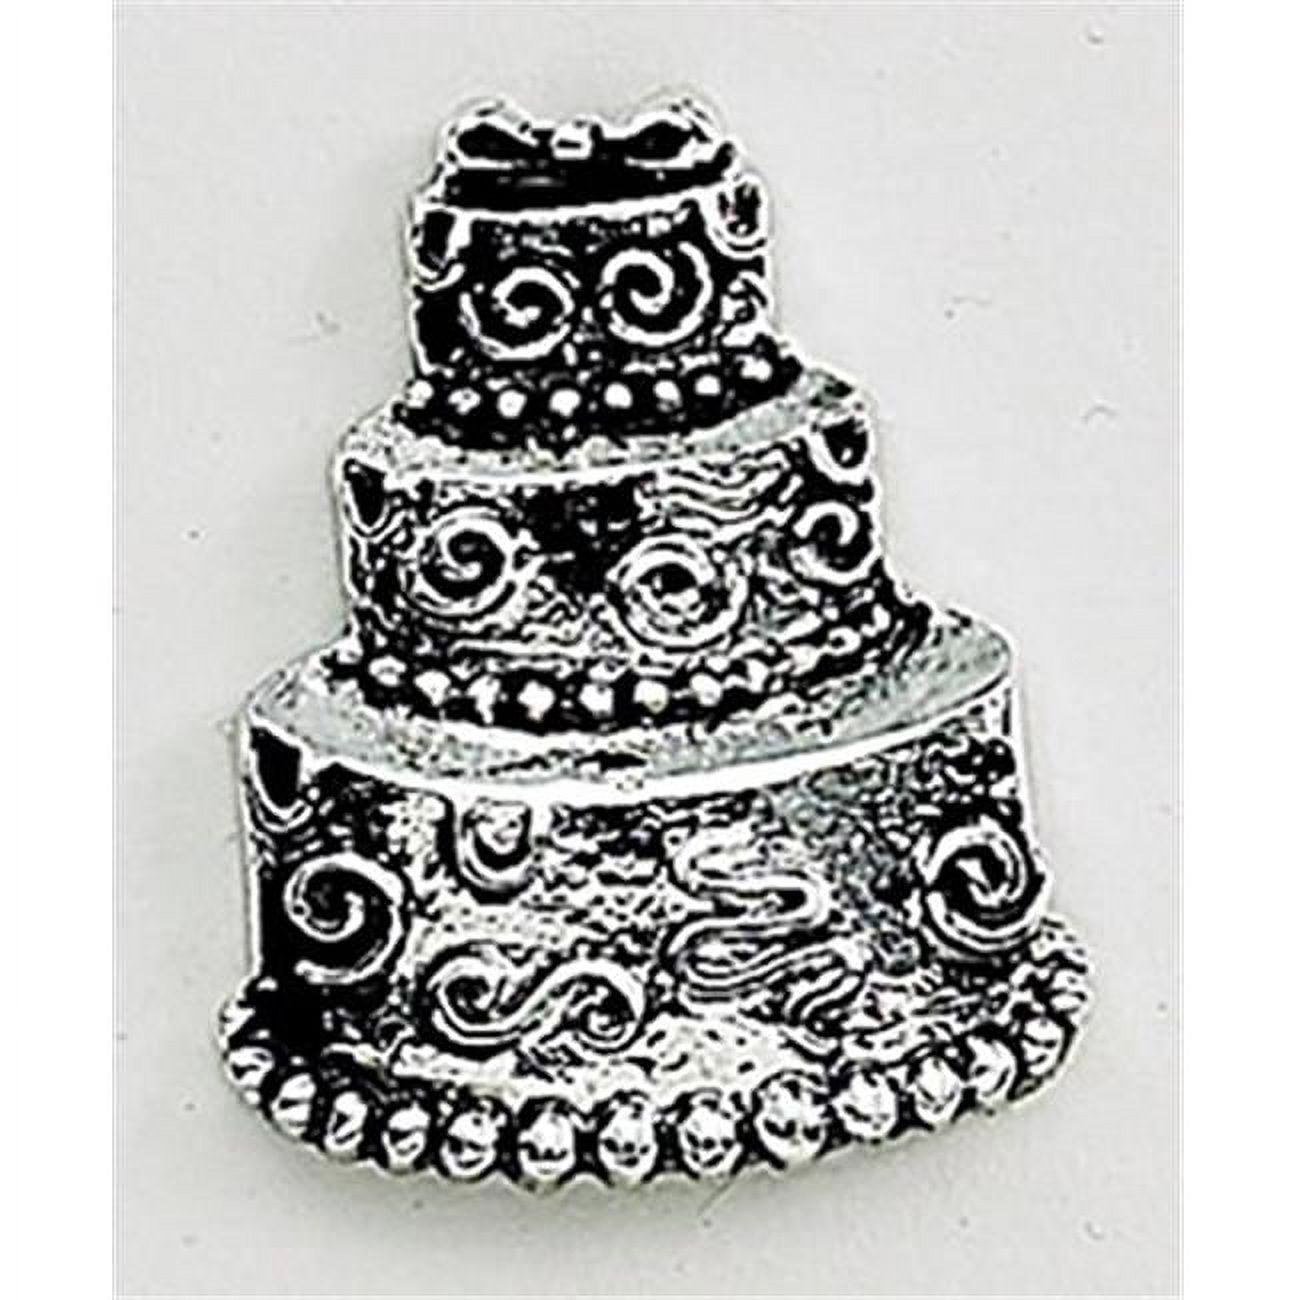 013288 1 X 1 In. Peel & Press Wedding Cake Icon, Silver Plated